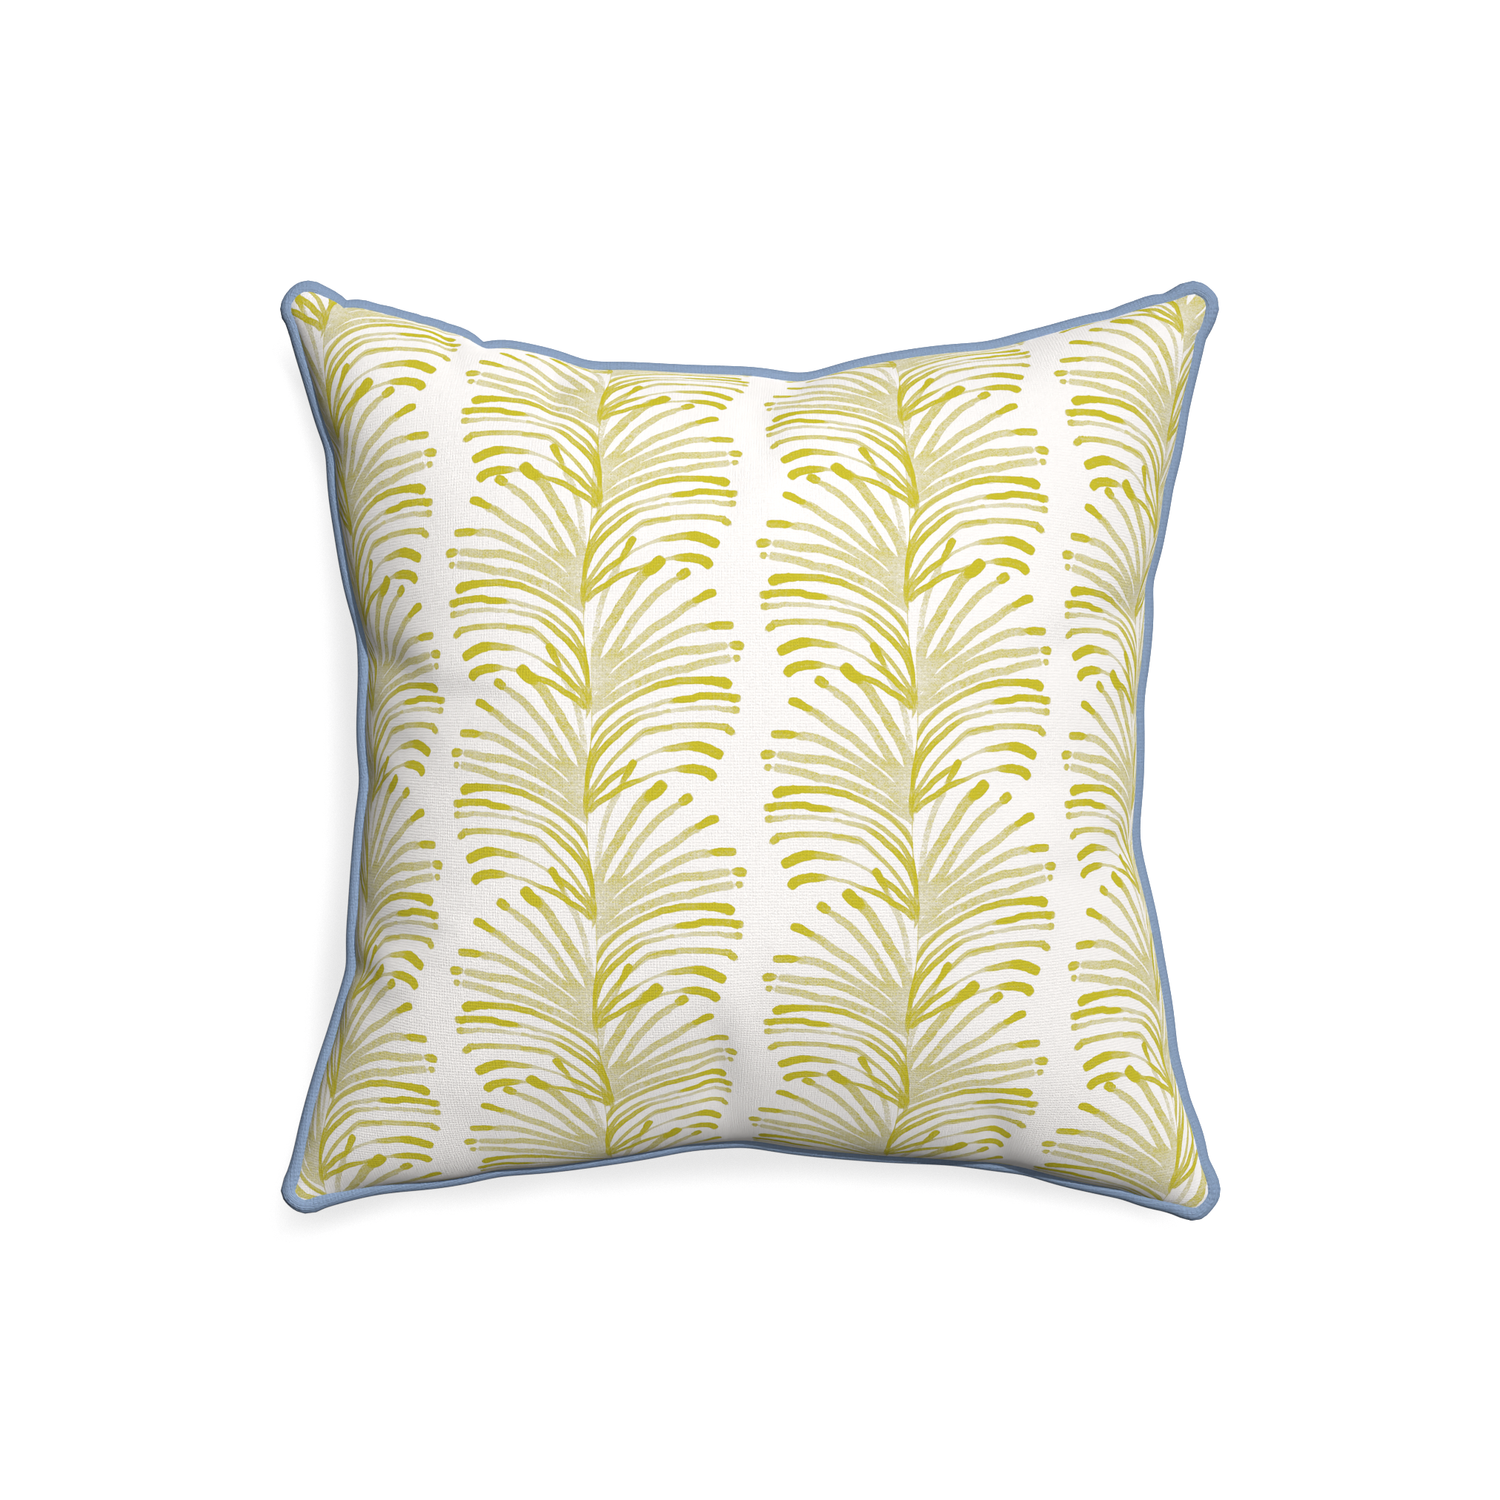 20-square emma chartreuse custom pillow with sky piping on white background